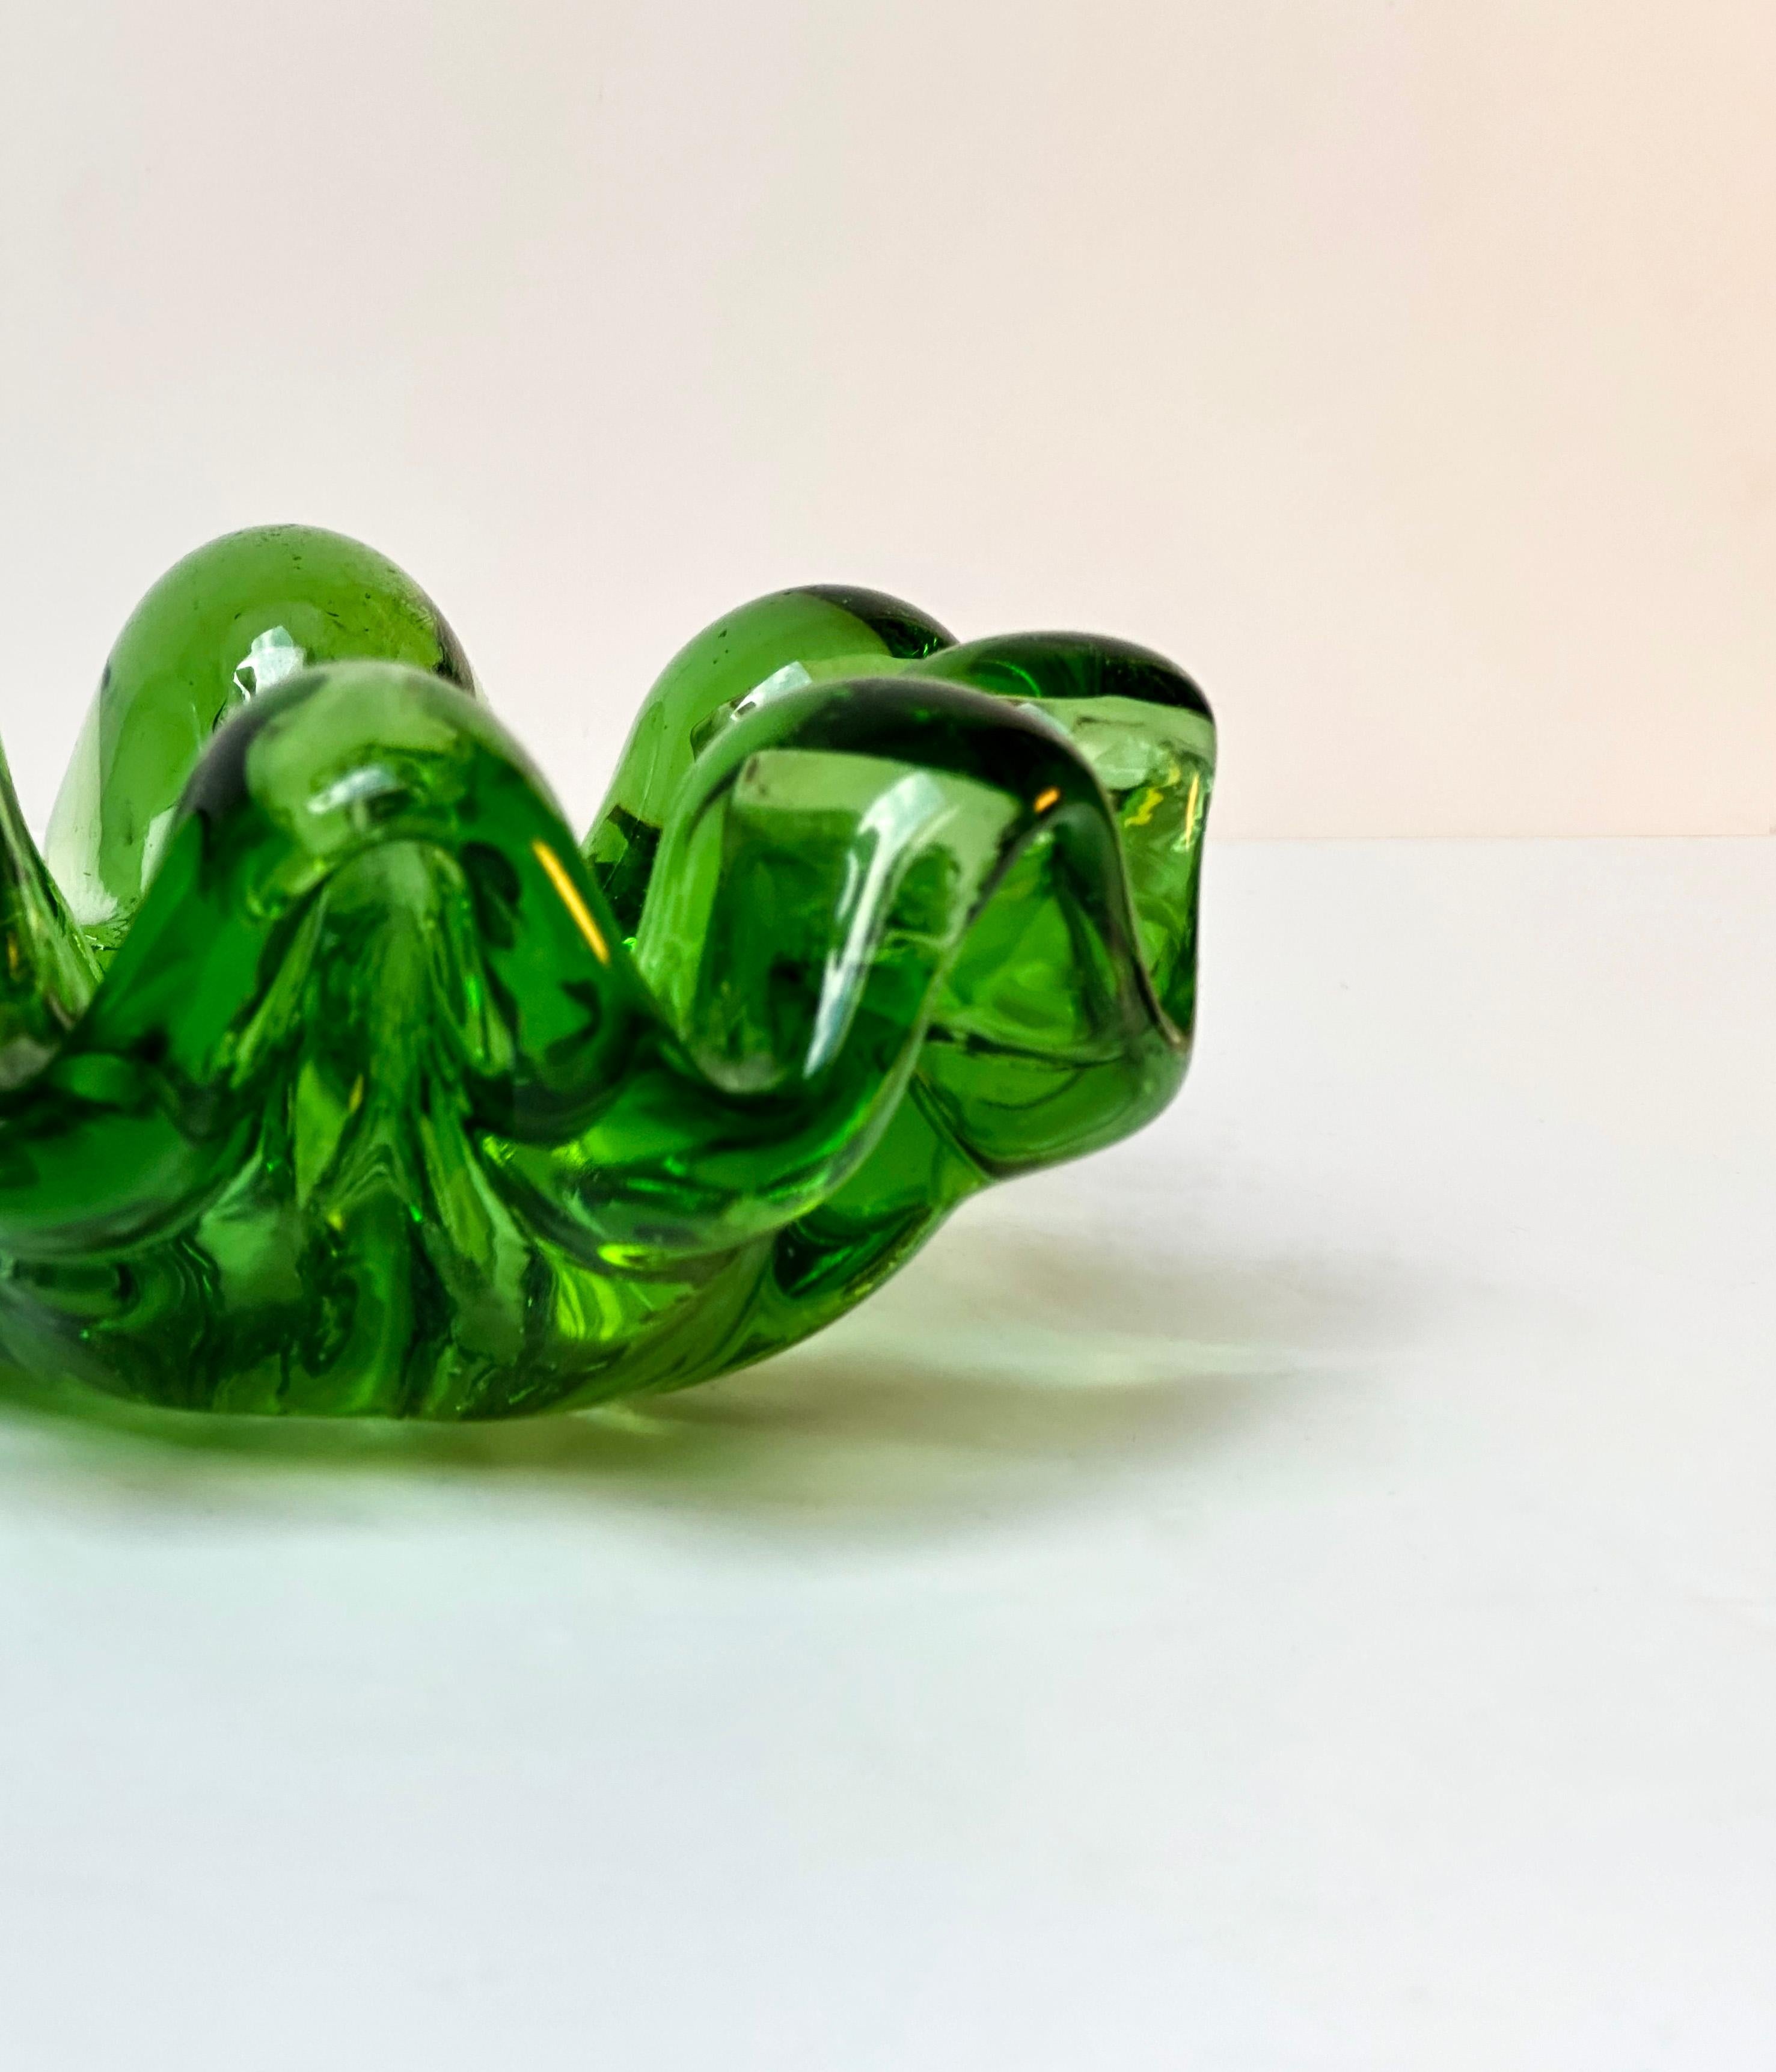 This Mid Century glass dish exudes a retro charm, crafted from luminous bright green glass. Its bold and vivid design draws inspiration from the iconic 'a grosse costolature' dish by Ercole Barovier. Featuring swags of bright green glass, the dish